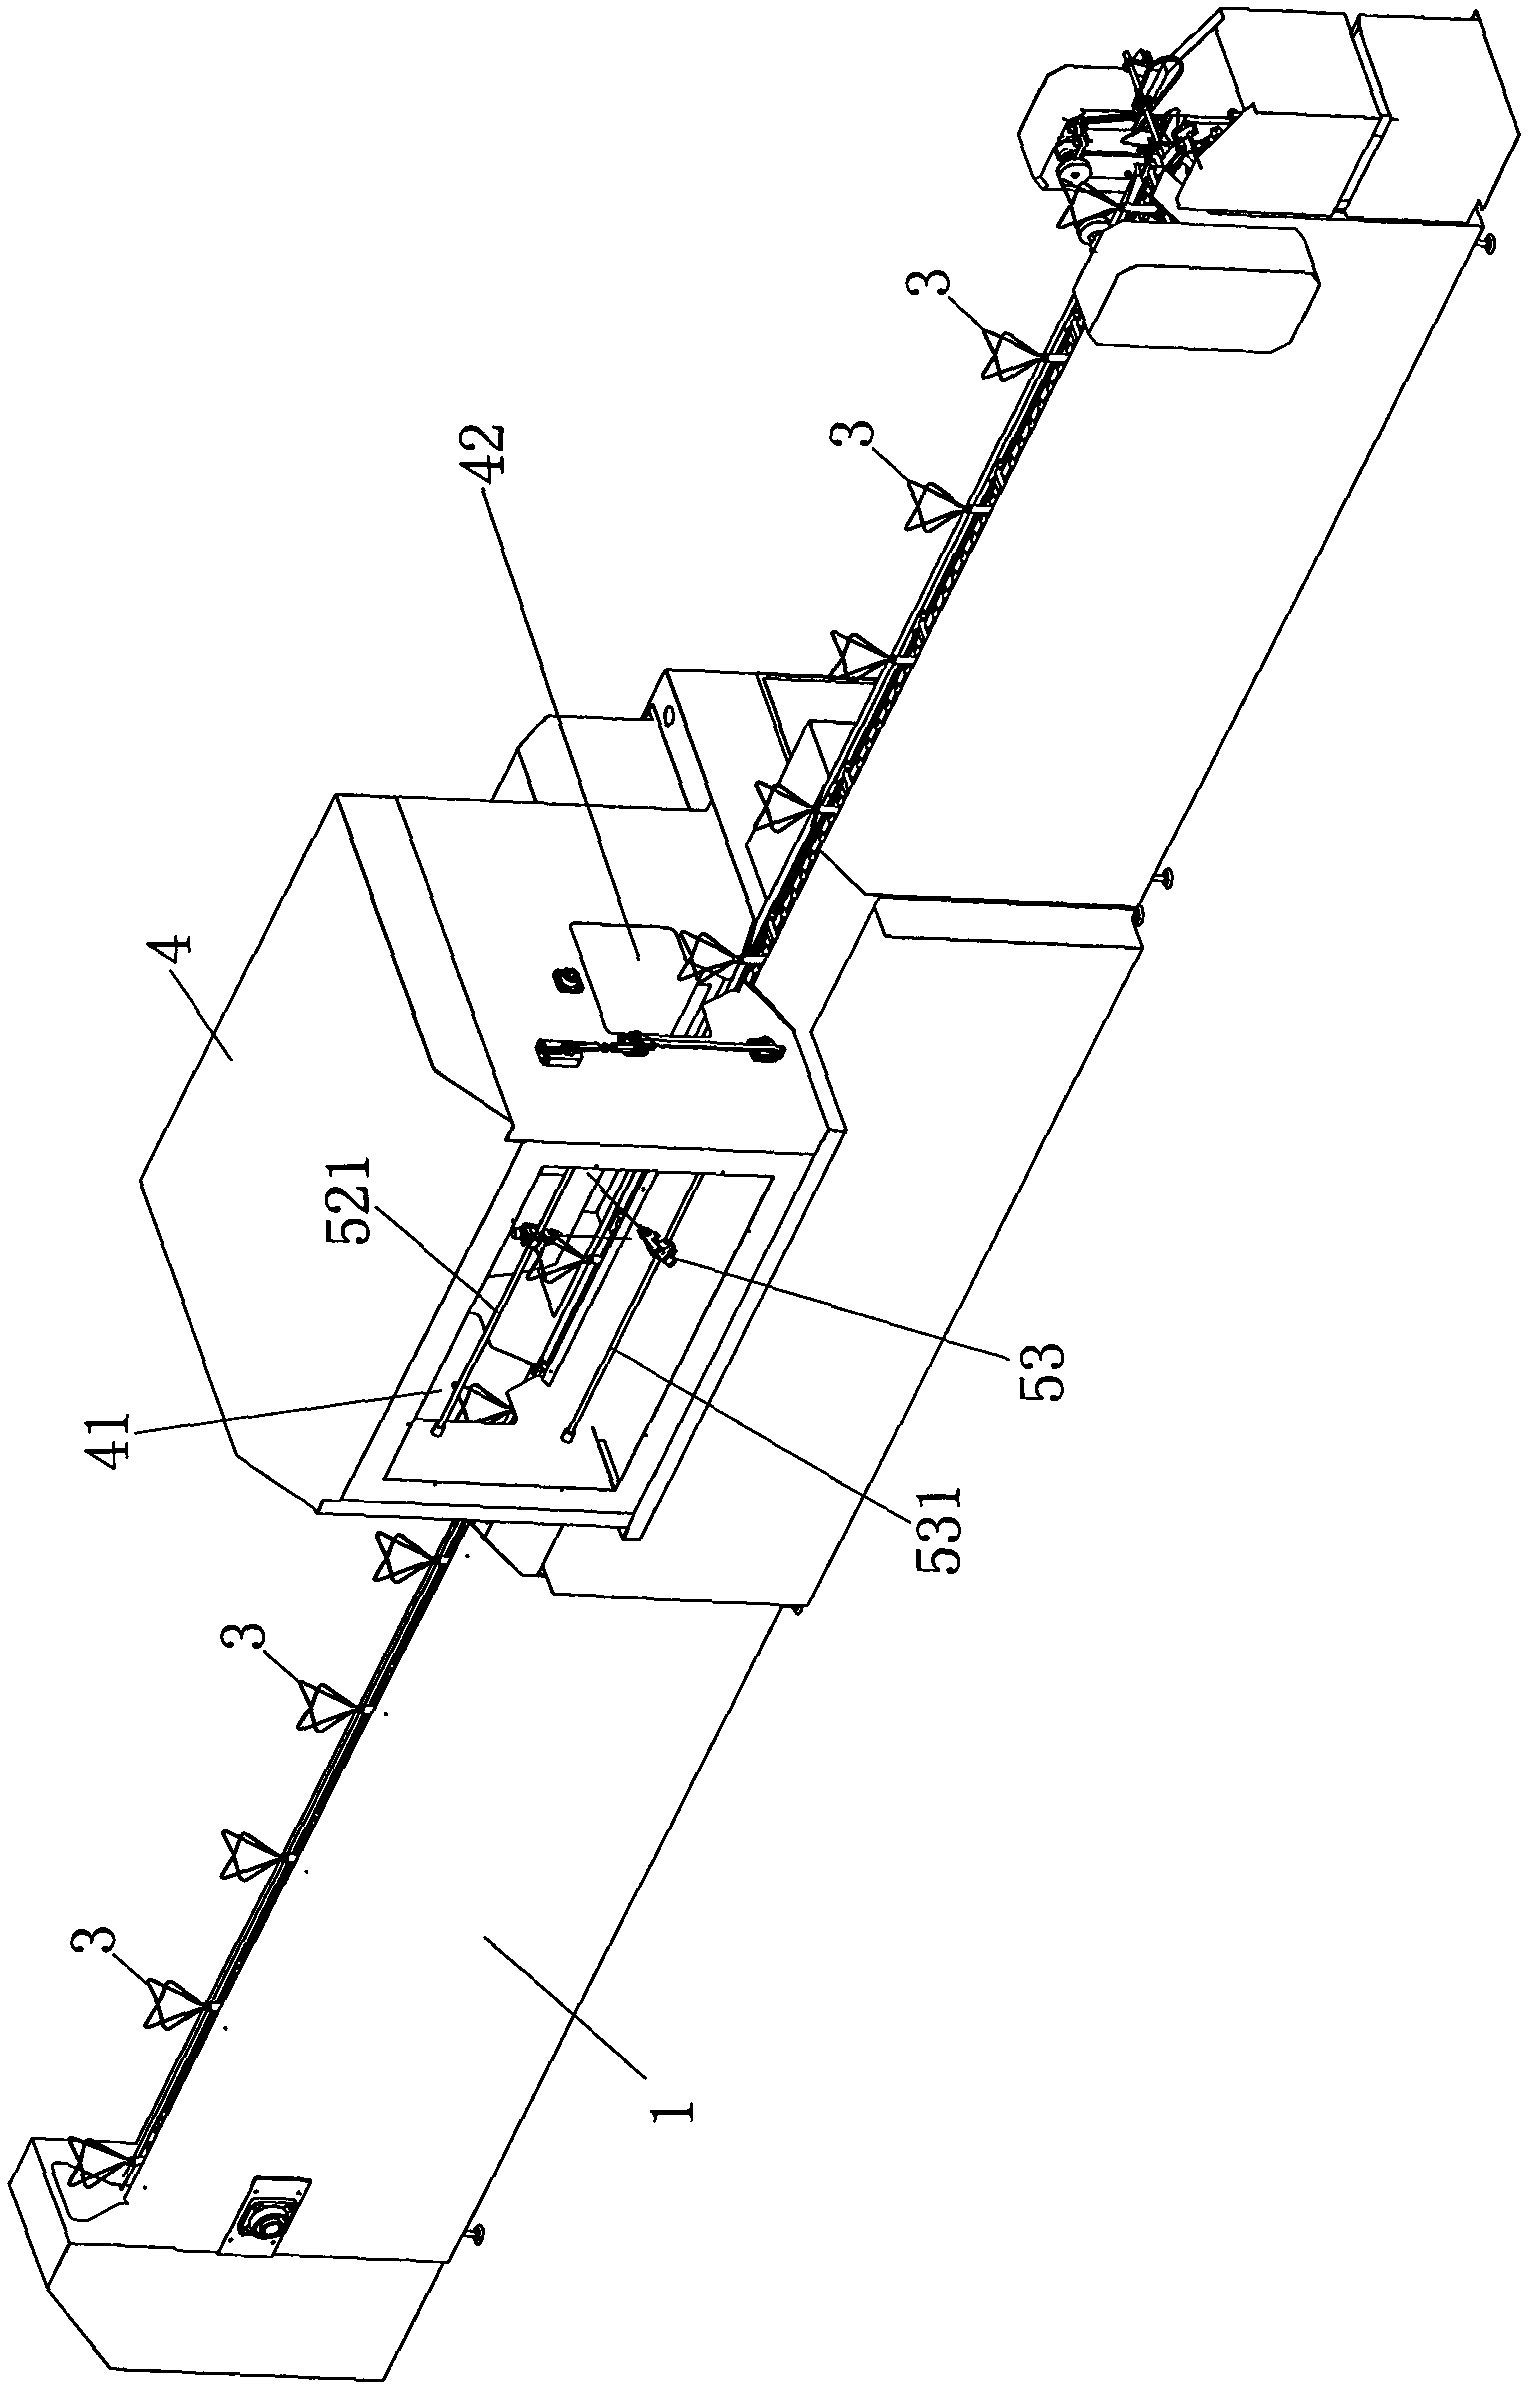 Device for automatically spraying glaze to open ceramic product